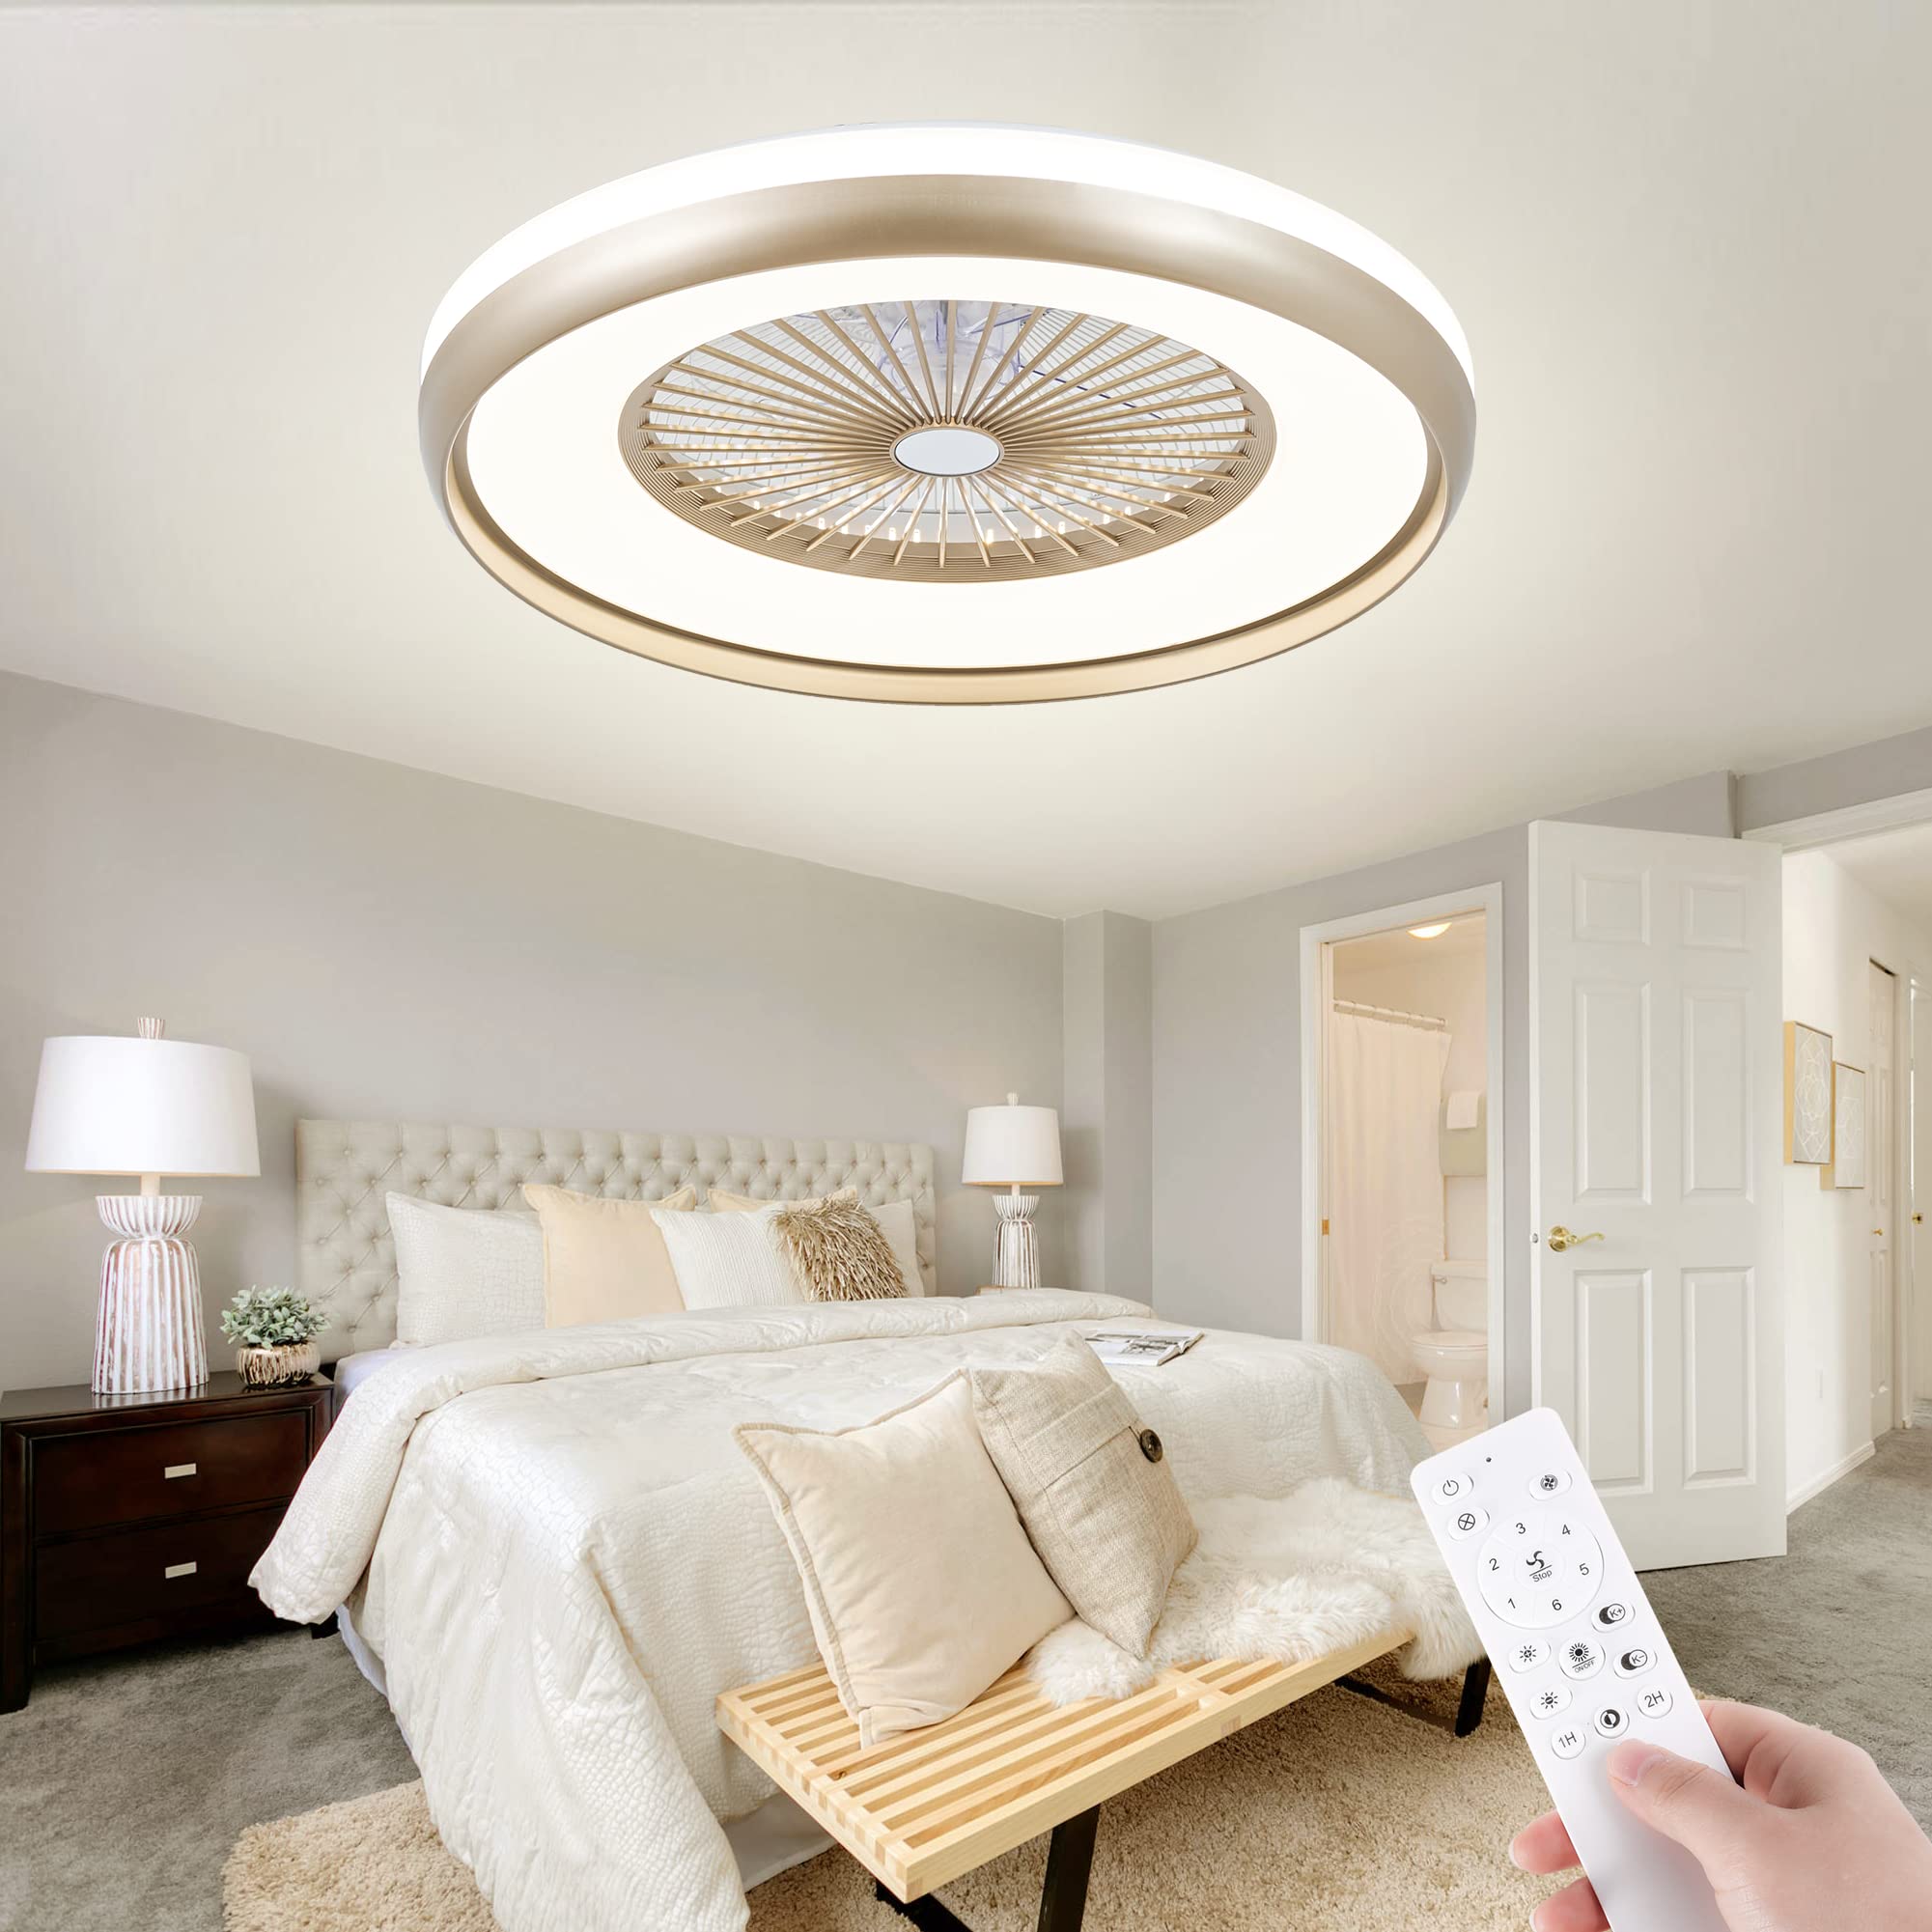 HUMHOLD 24" Bladeless Ceiling Fan